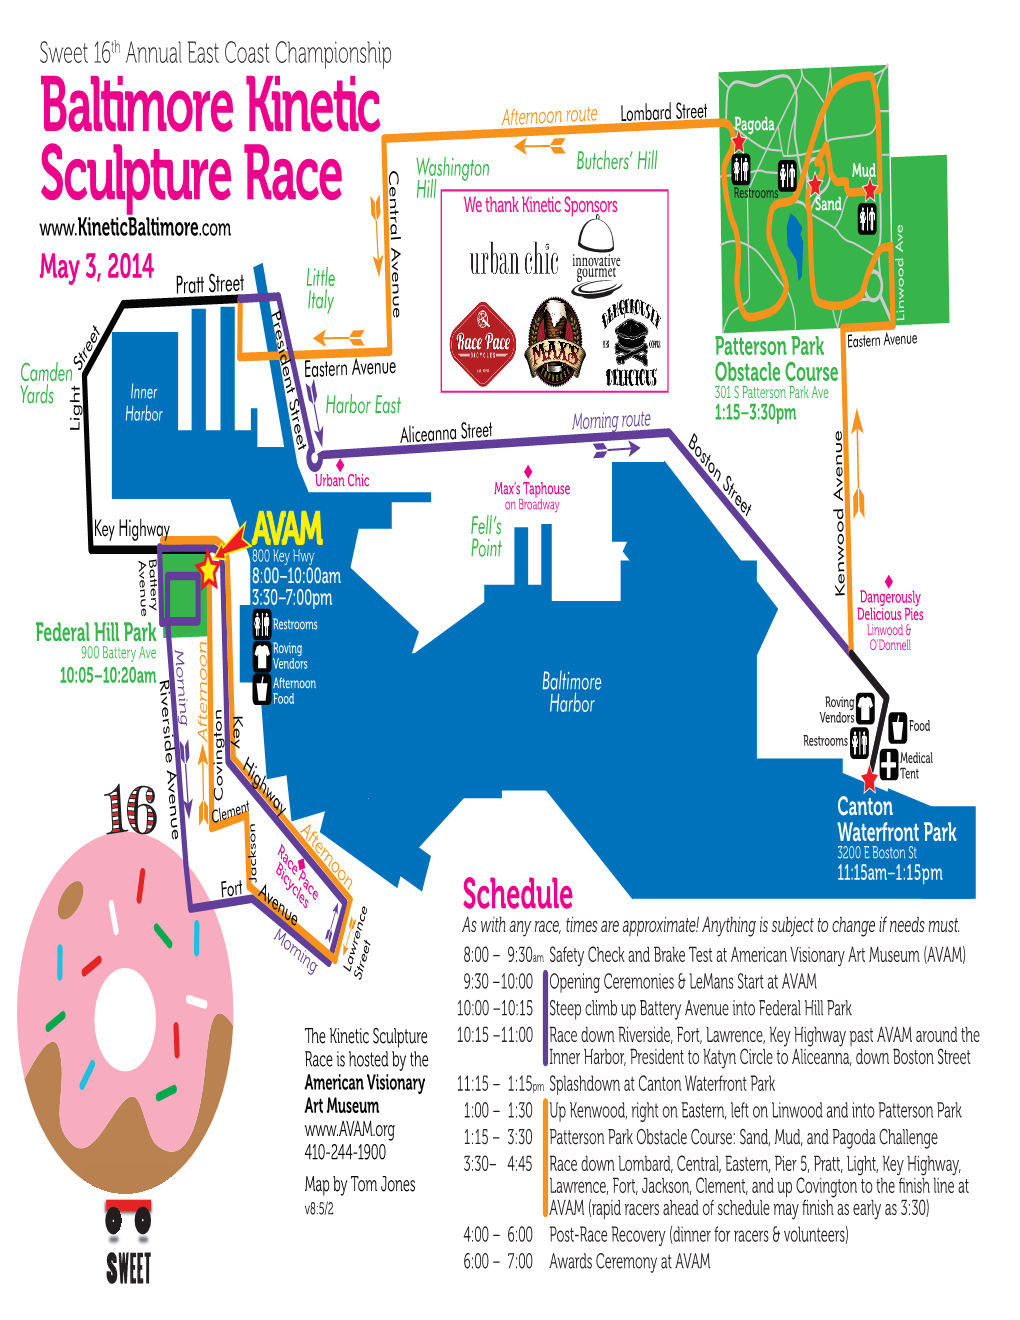 2014 Baltimore Kinetic Sculpture Race Spectator's Guide